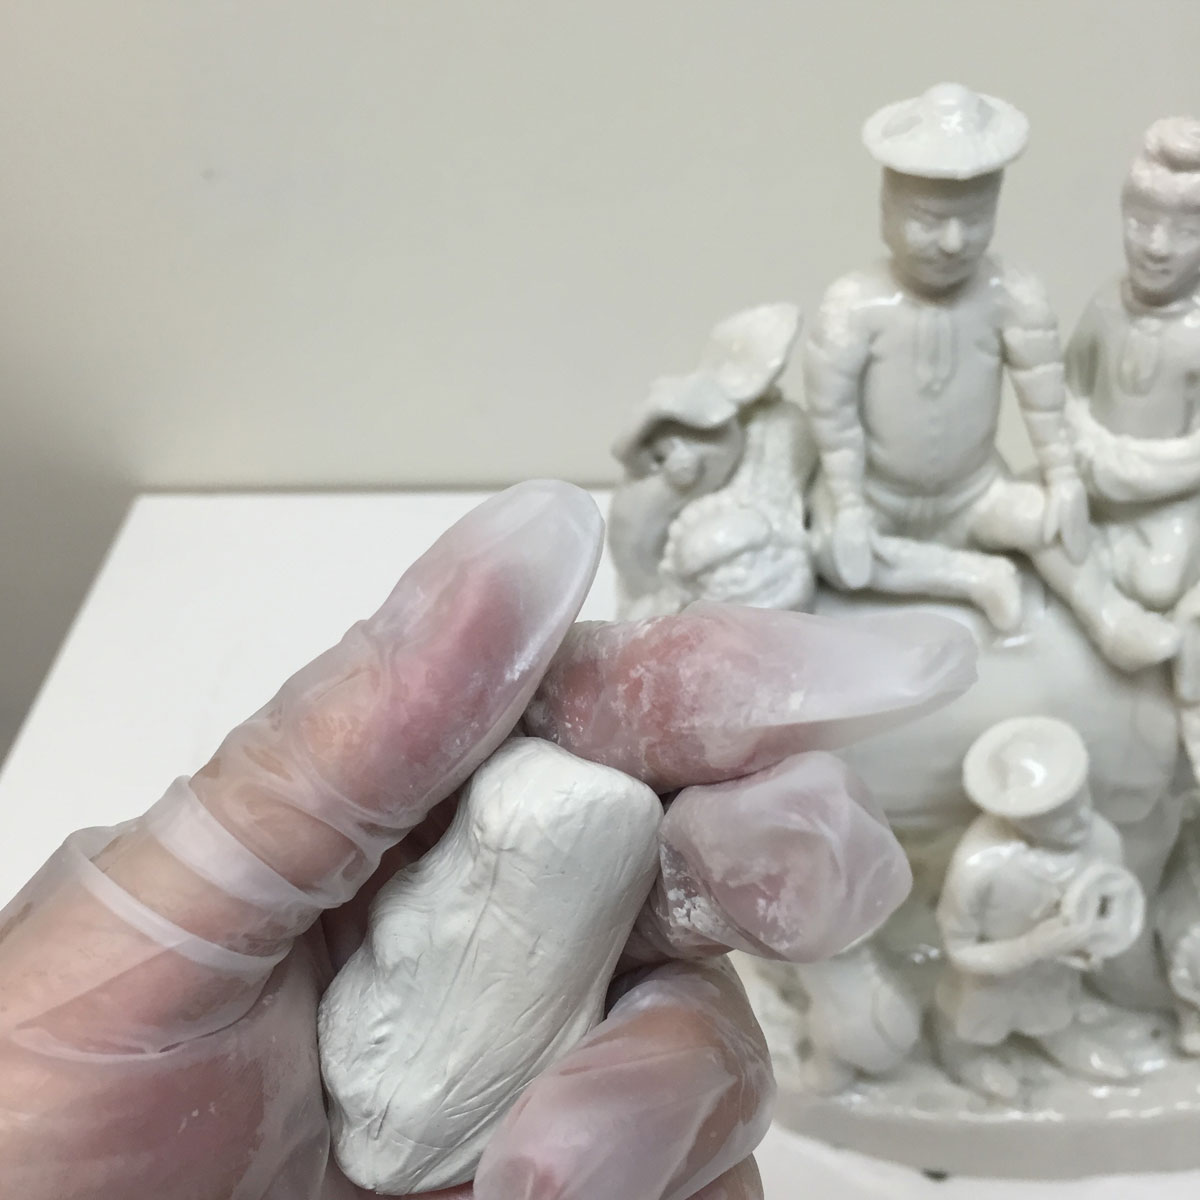 Hand squeezing clay with white porcelain figure in the background